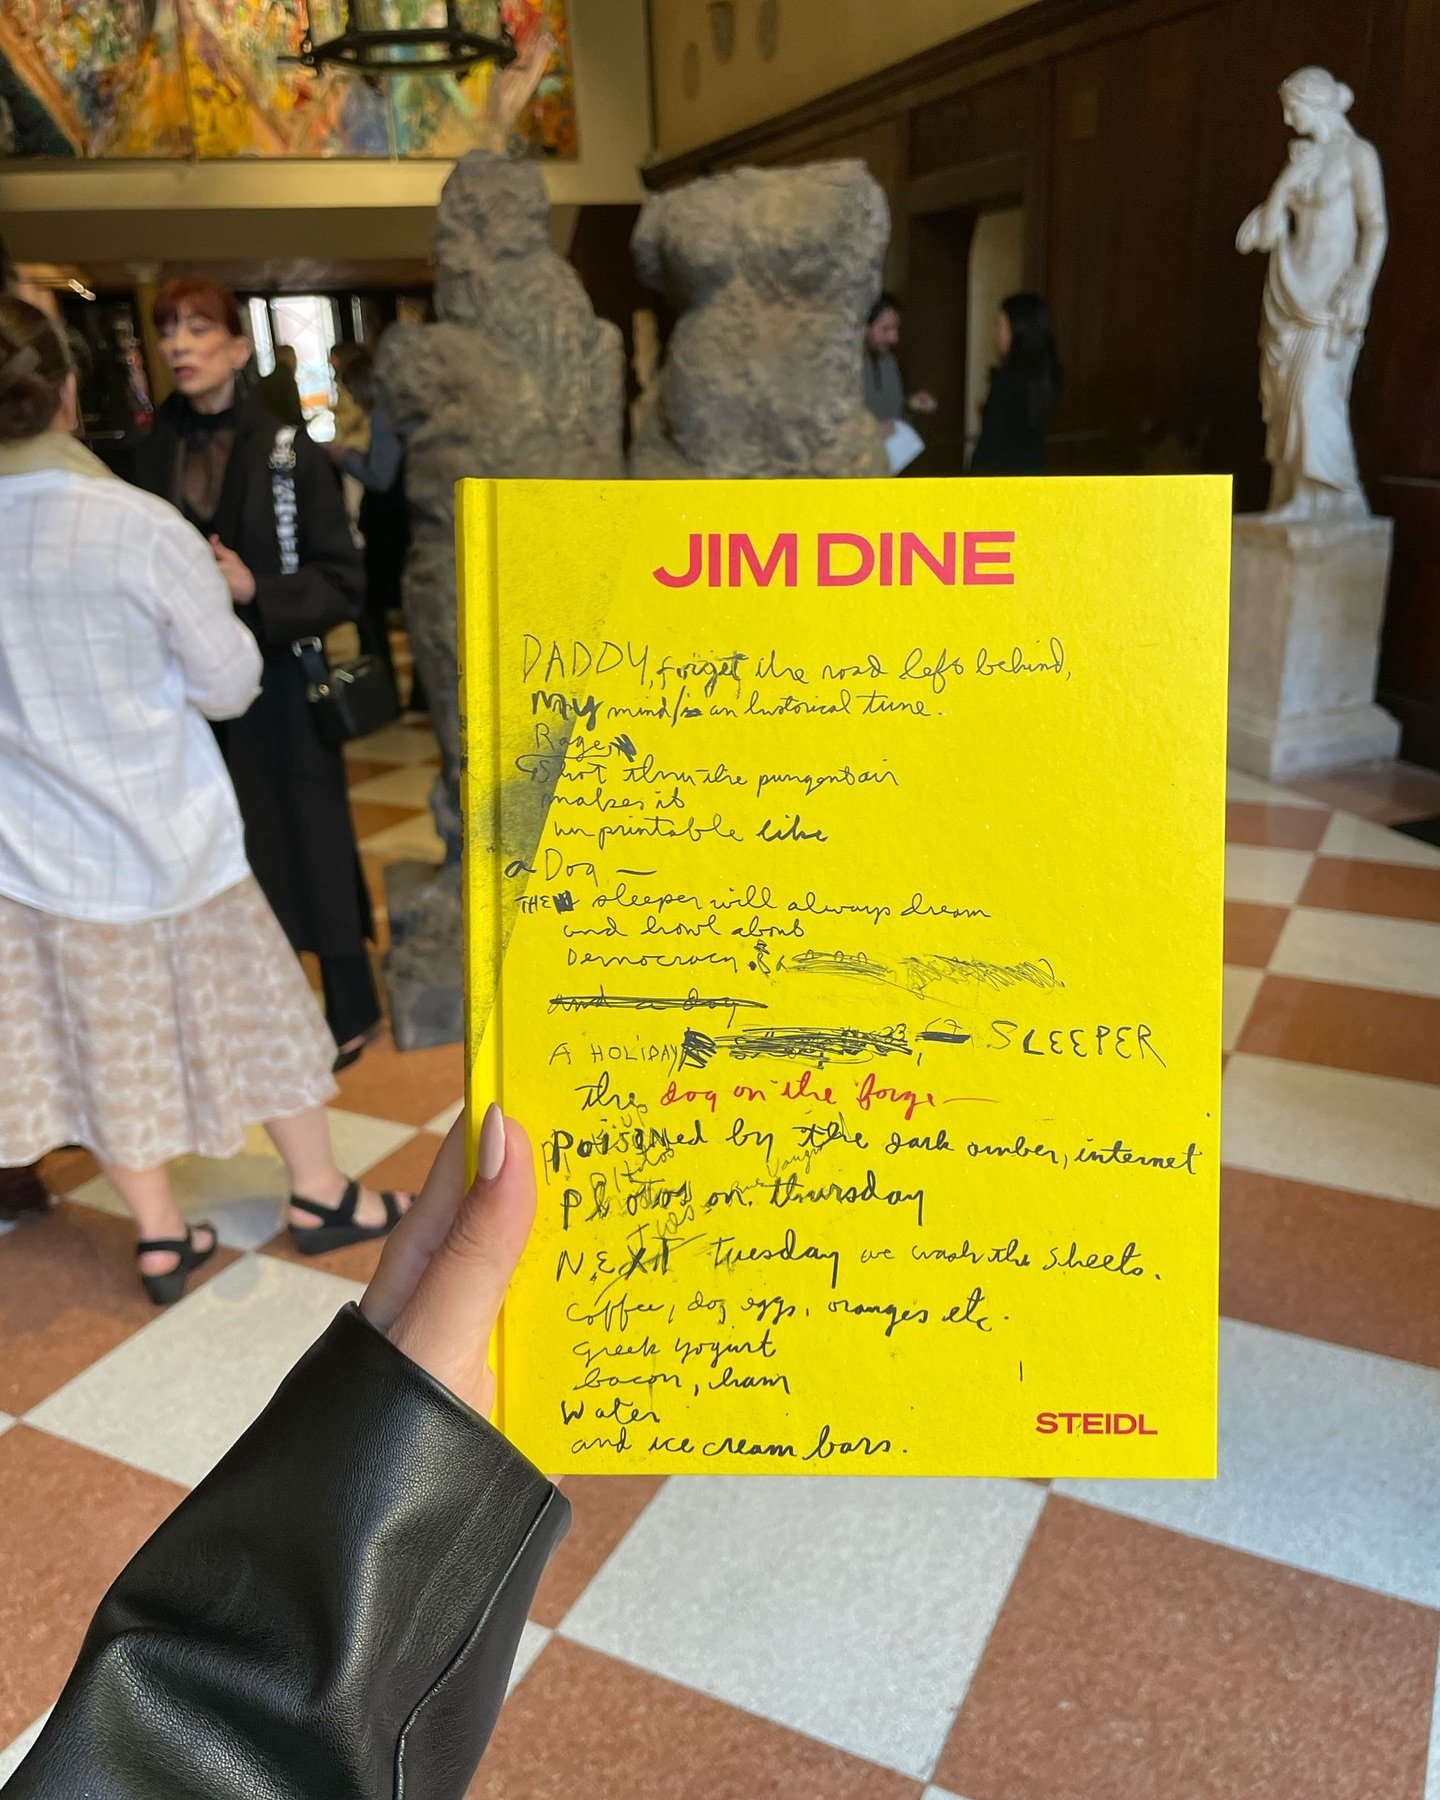 ✨ GIVEAWAY ANNOUNCEMENT ✨ Details below! 👉

🏆 One lucky winner will receive a copy of the &ldquo;Dog on the Forge&rdquo; exhibition catalogue, personally signed by Jim Dine.

Here&rsquo;s how to enter:

1. Follow @jimdinestudio on Instagram.

2. Ta